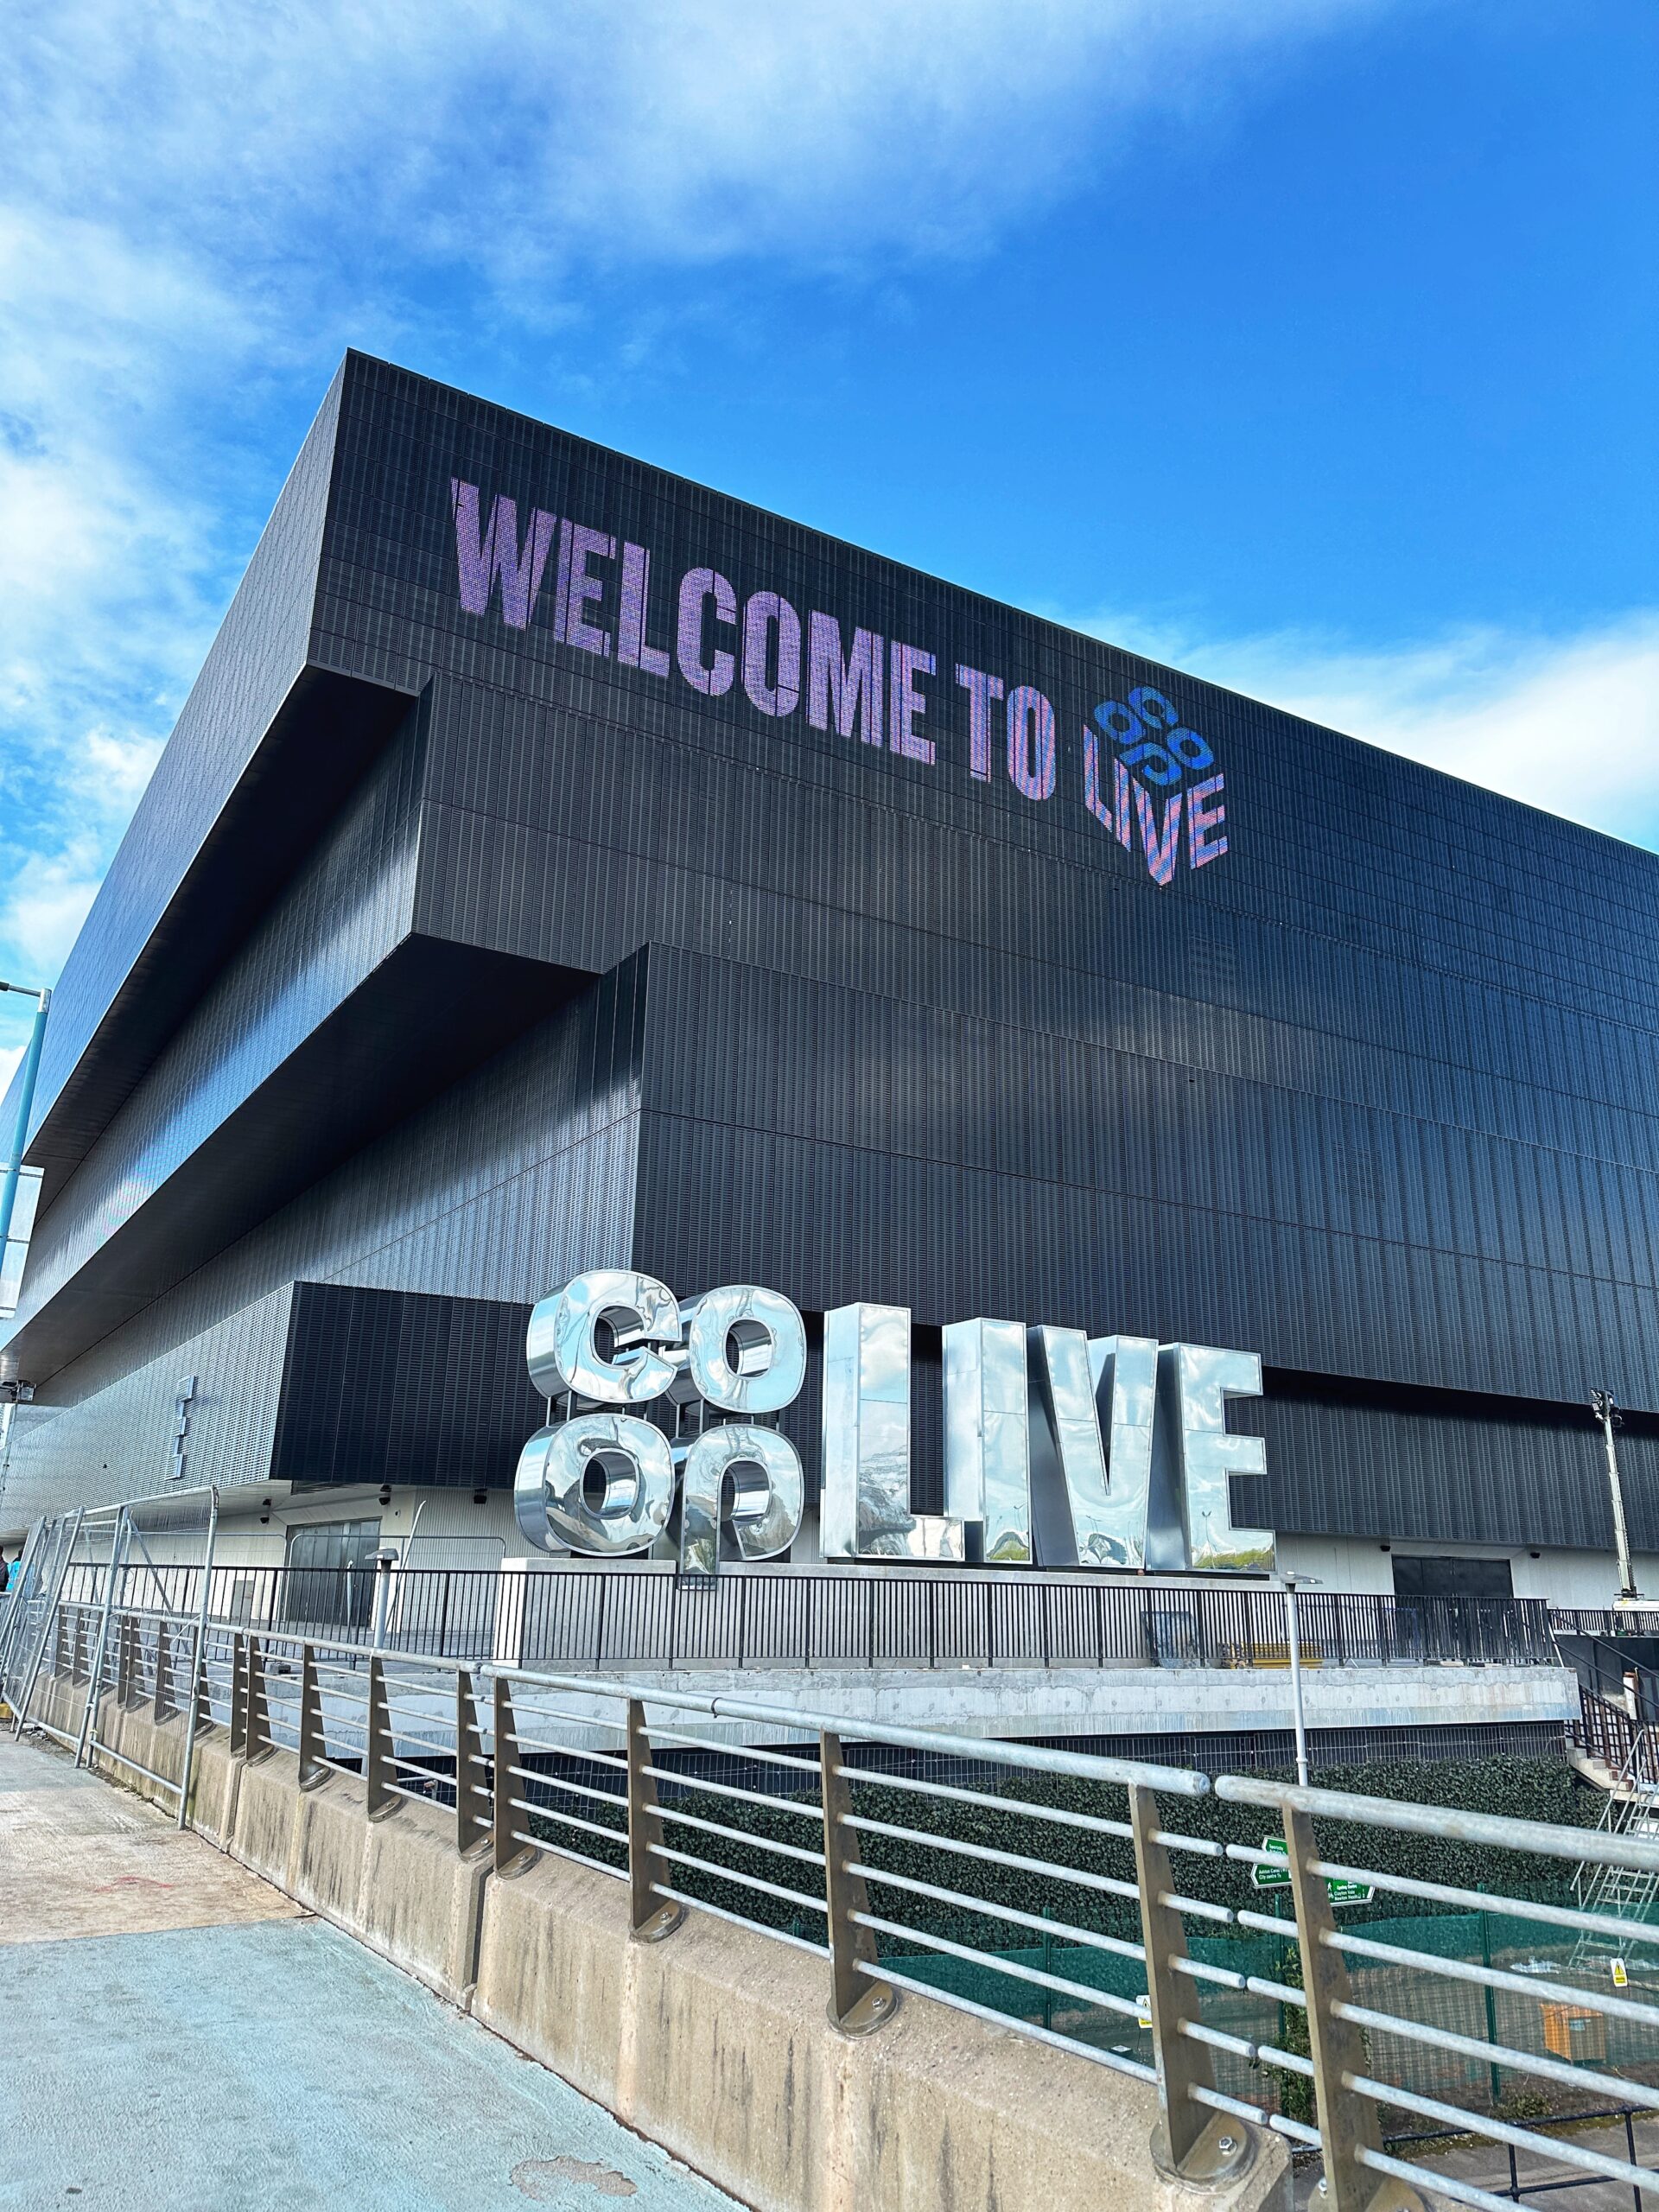 Co-op Live WILL open this week, it has assured fans. Credit: The Manc Group